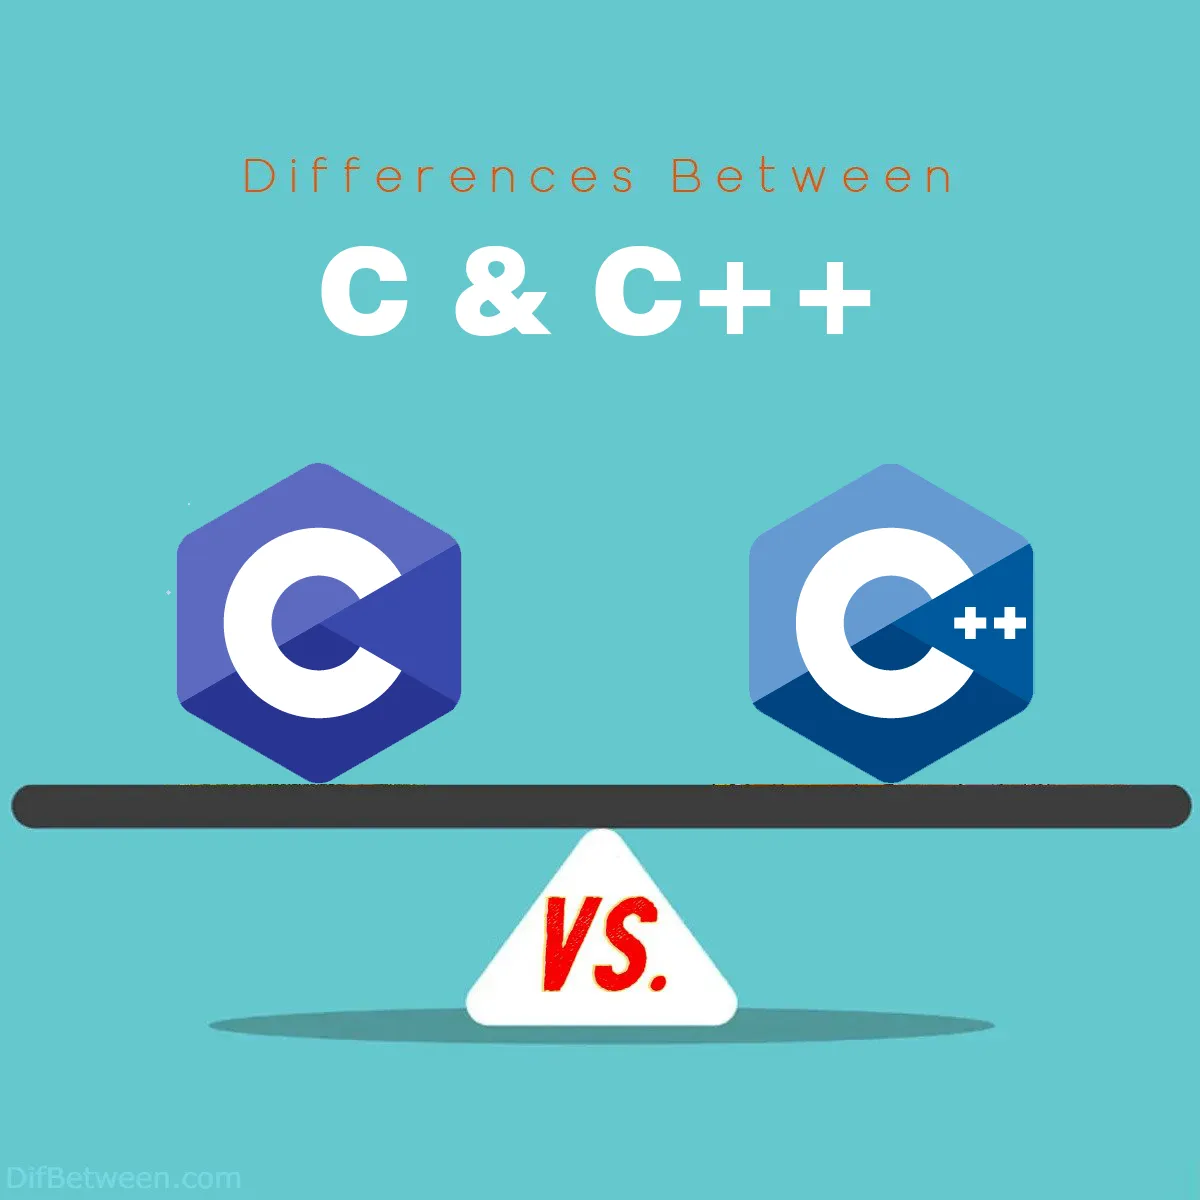 Differences Between C and C++